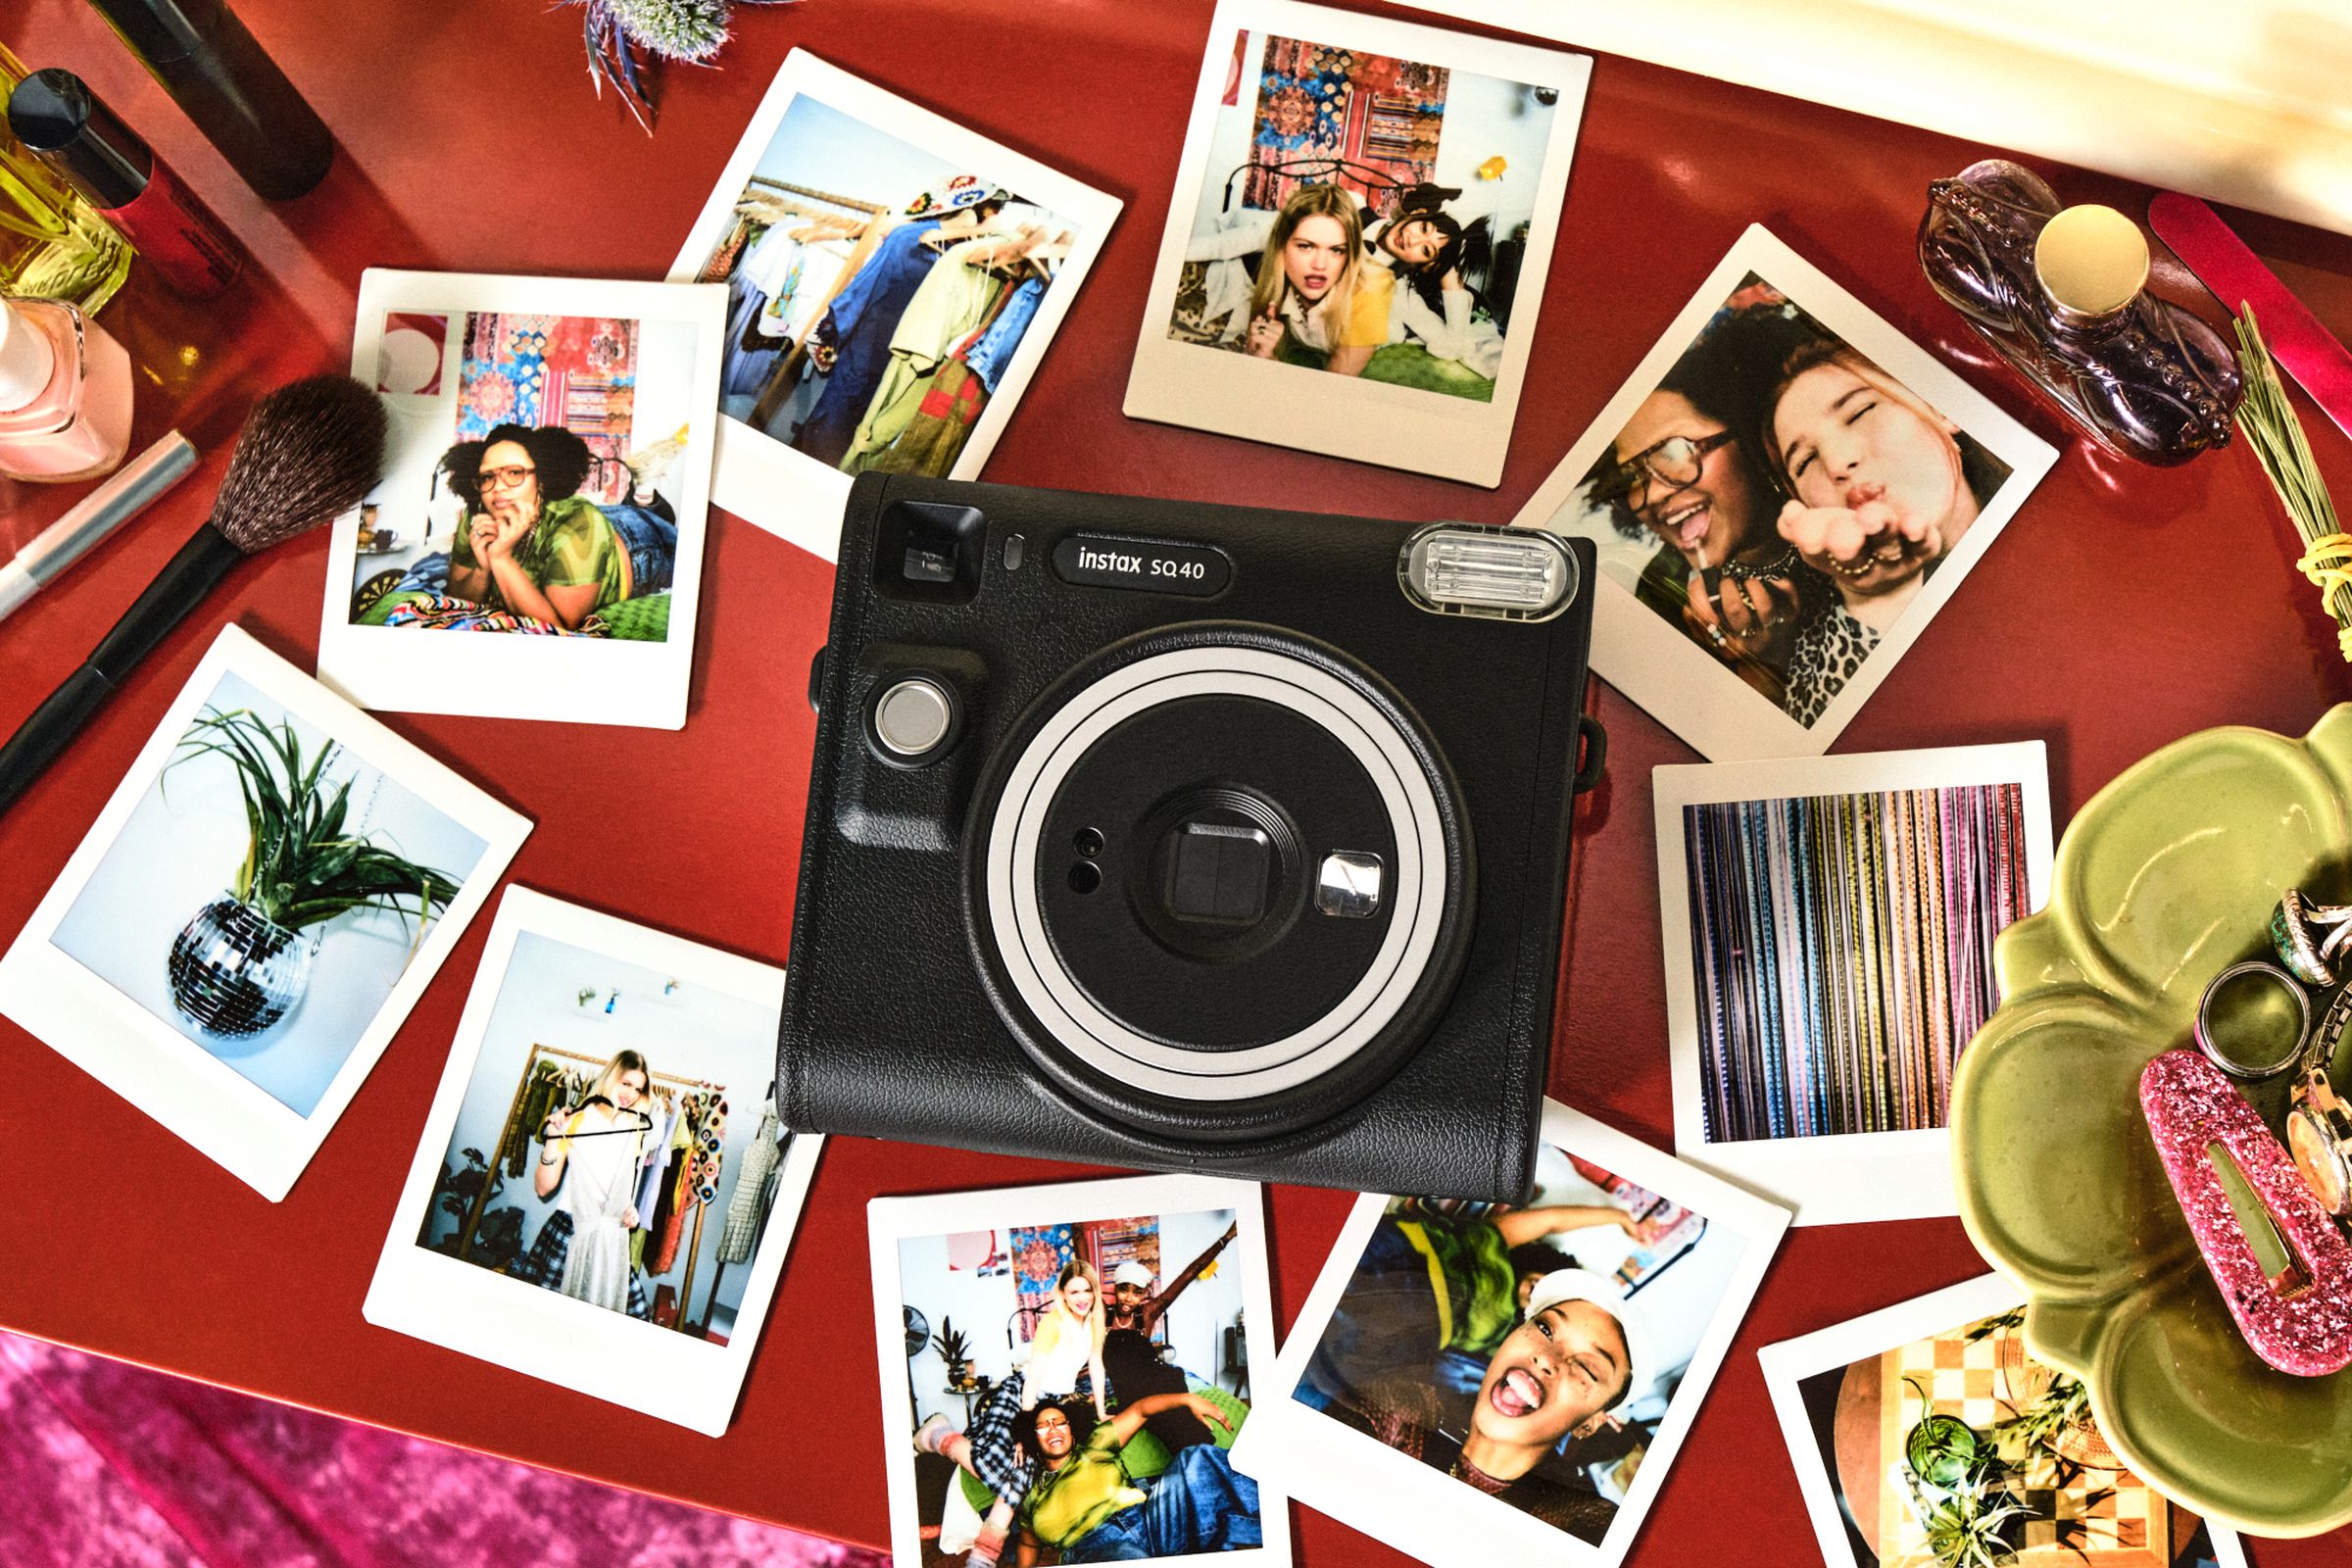 Fujifilm Instax Square SQ40 instant camera surrounded by photos it printed of people.